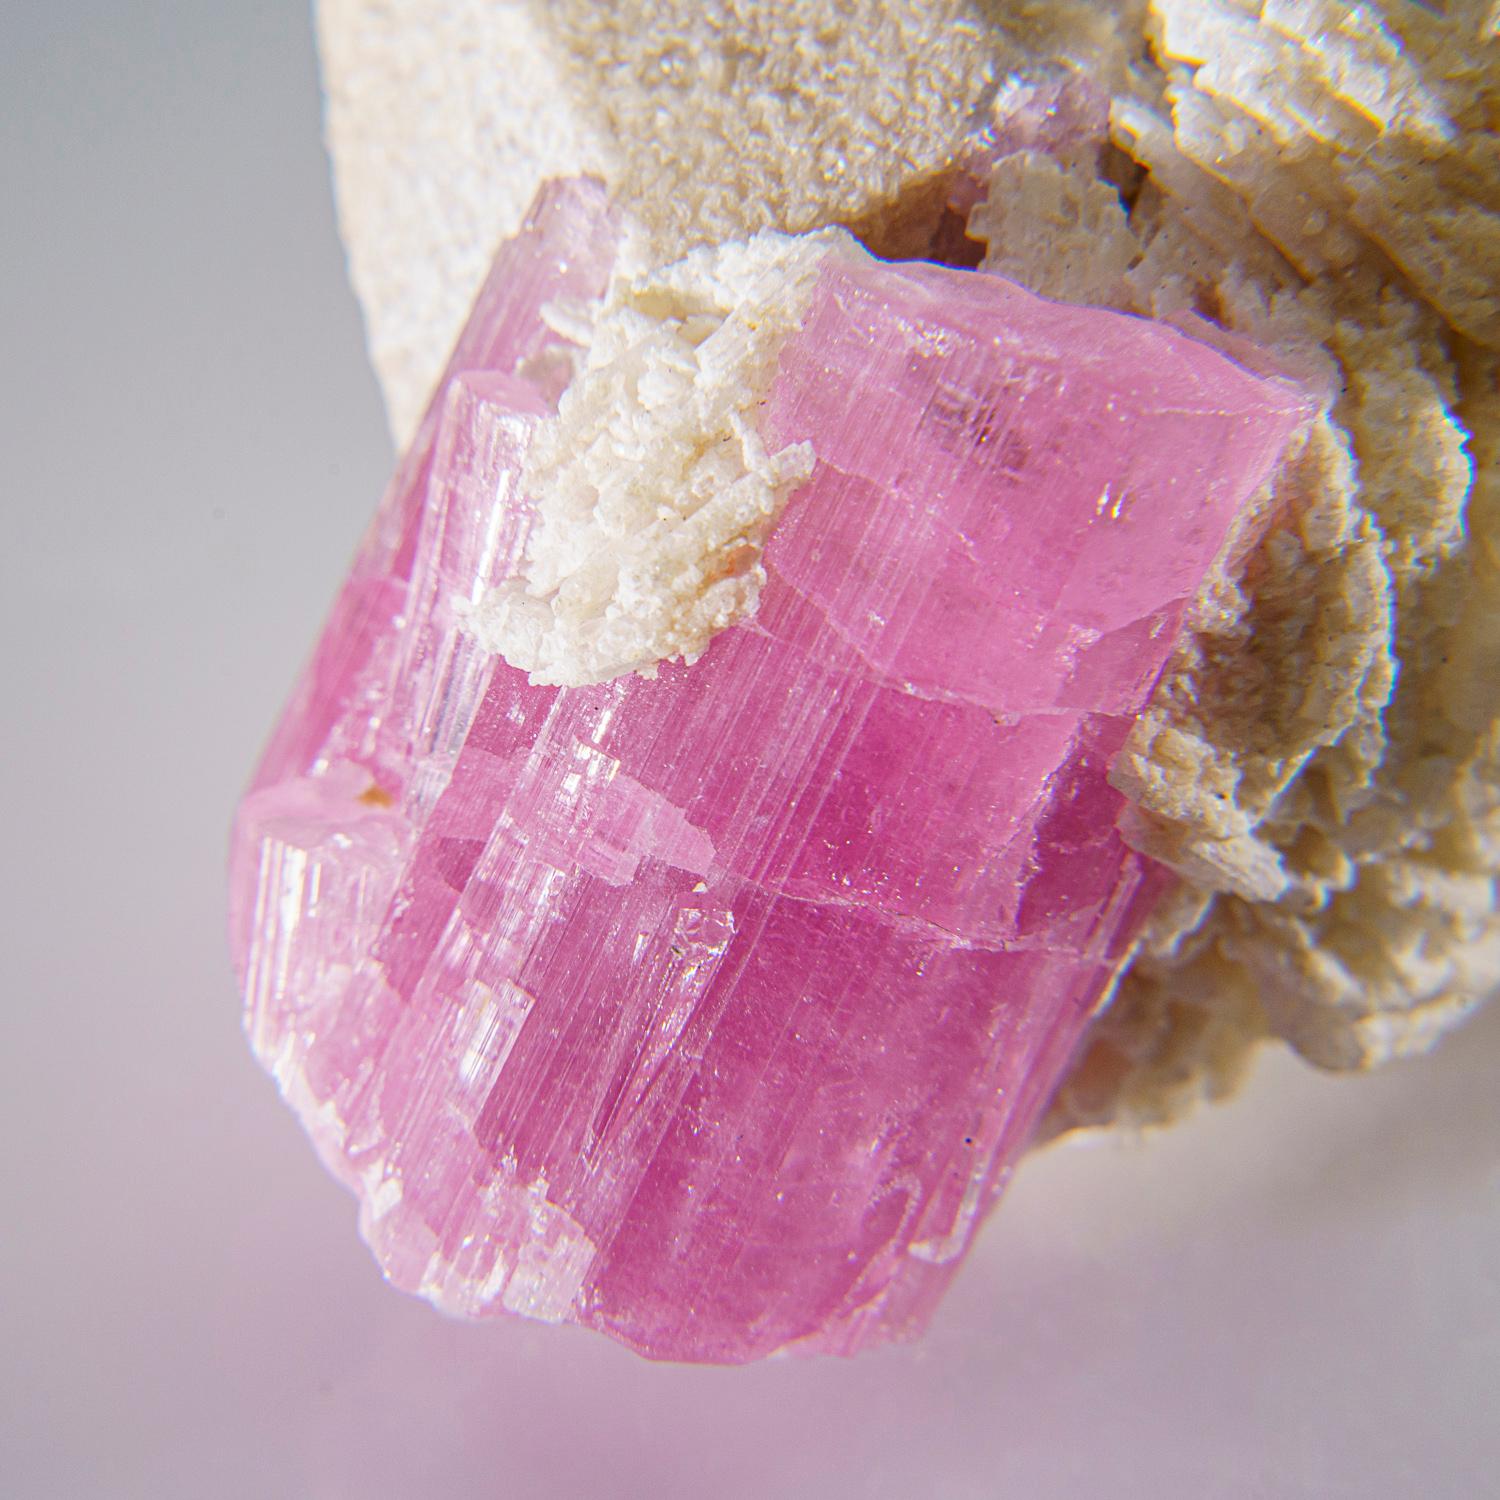 From Paprok, Kamdesh District, Nuristan Province, Afghanistan
Gemmy bi-colored elbaite tourmaline crystal on white albite matrix. The elbaite crystal has bright pink to watermelon colors. 

Weight: 247.4 grams, Size: 3.5 x 2.5 x 2 inches